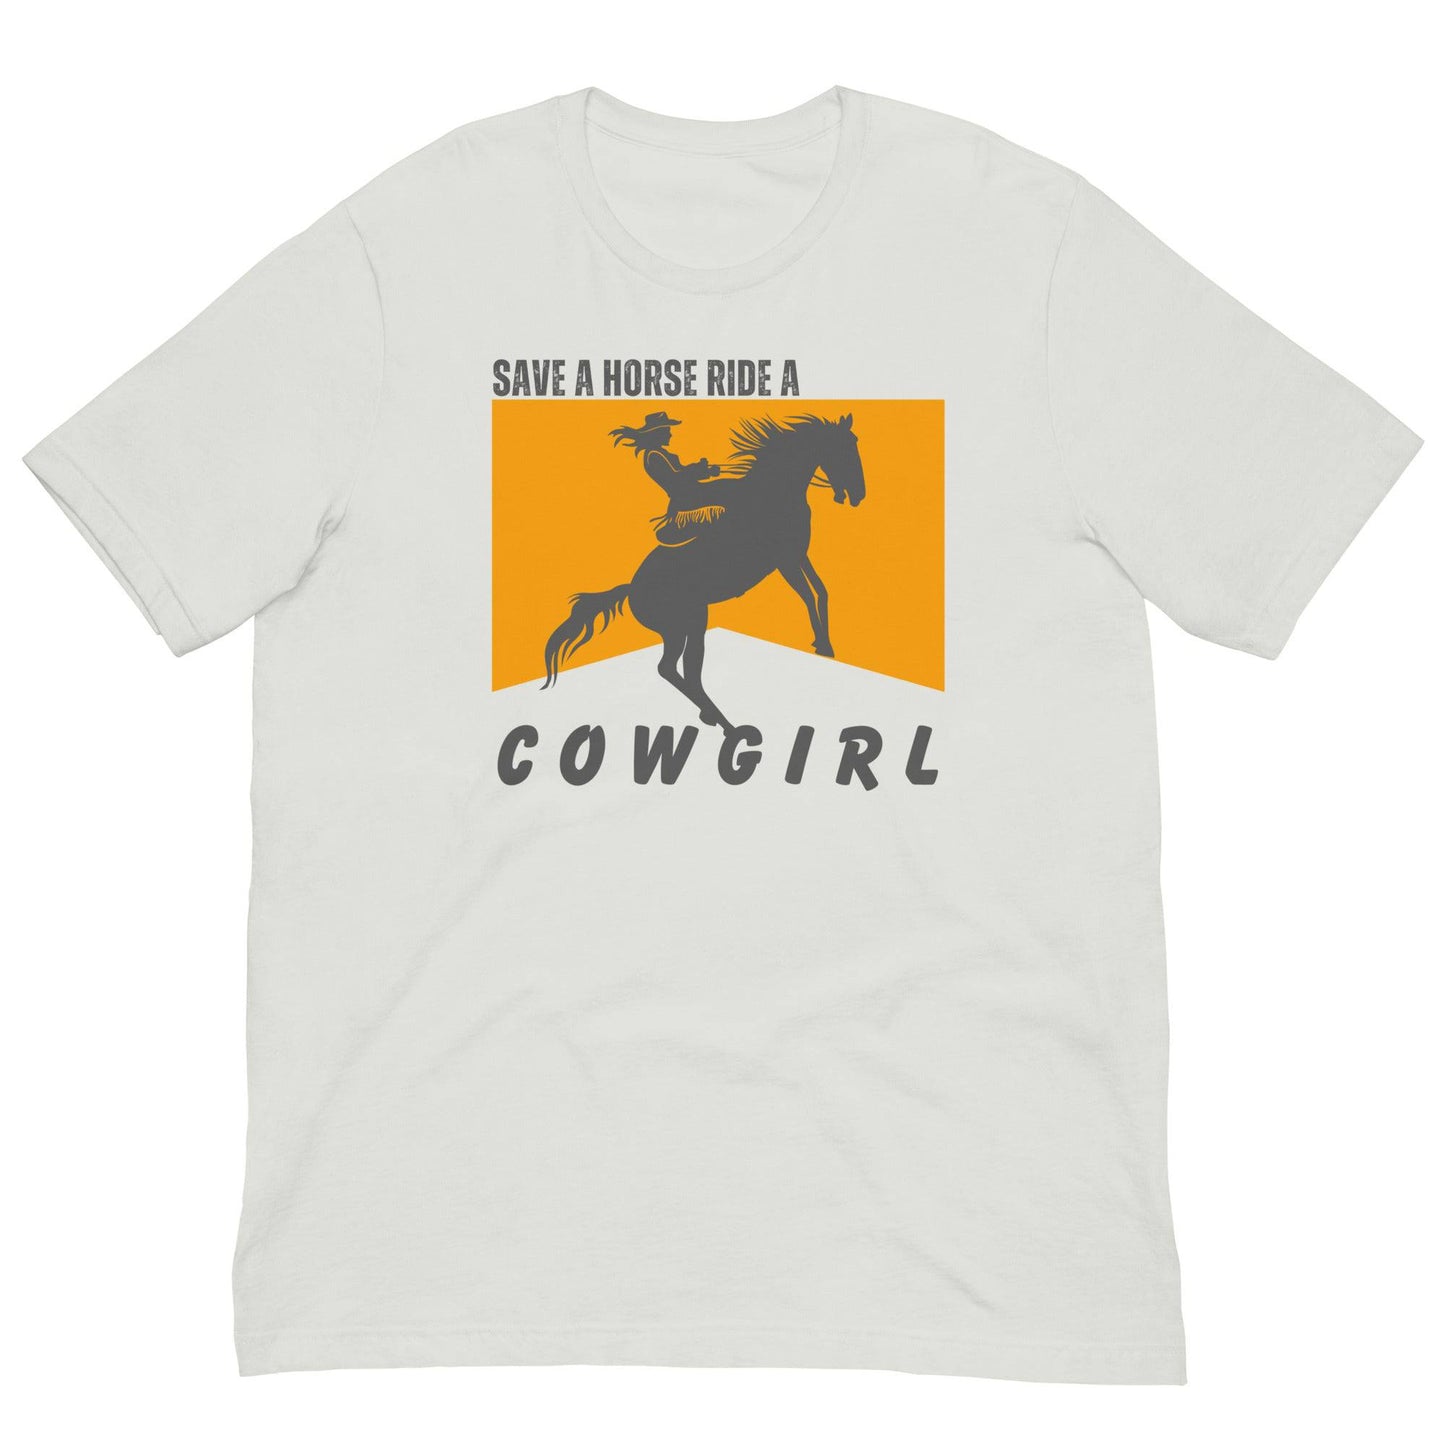 Save A Horse Ride a Cowgirl Unisex t-shirt - Rose Gold Co. Shop